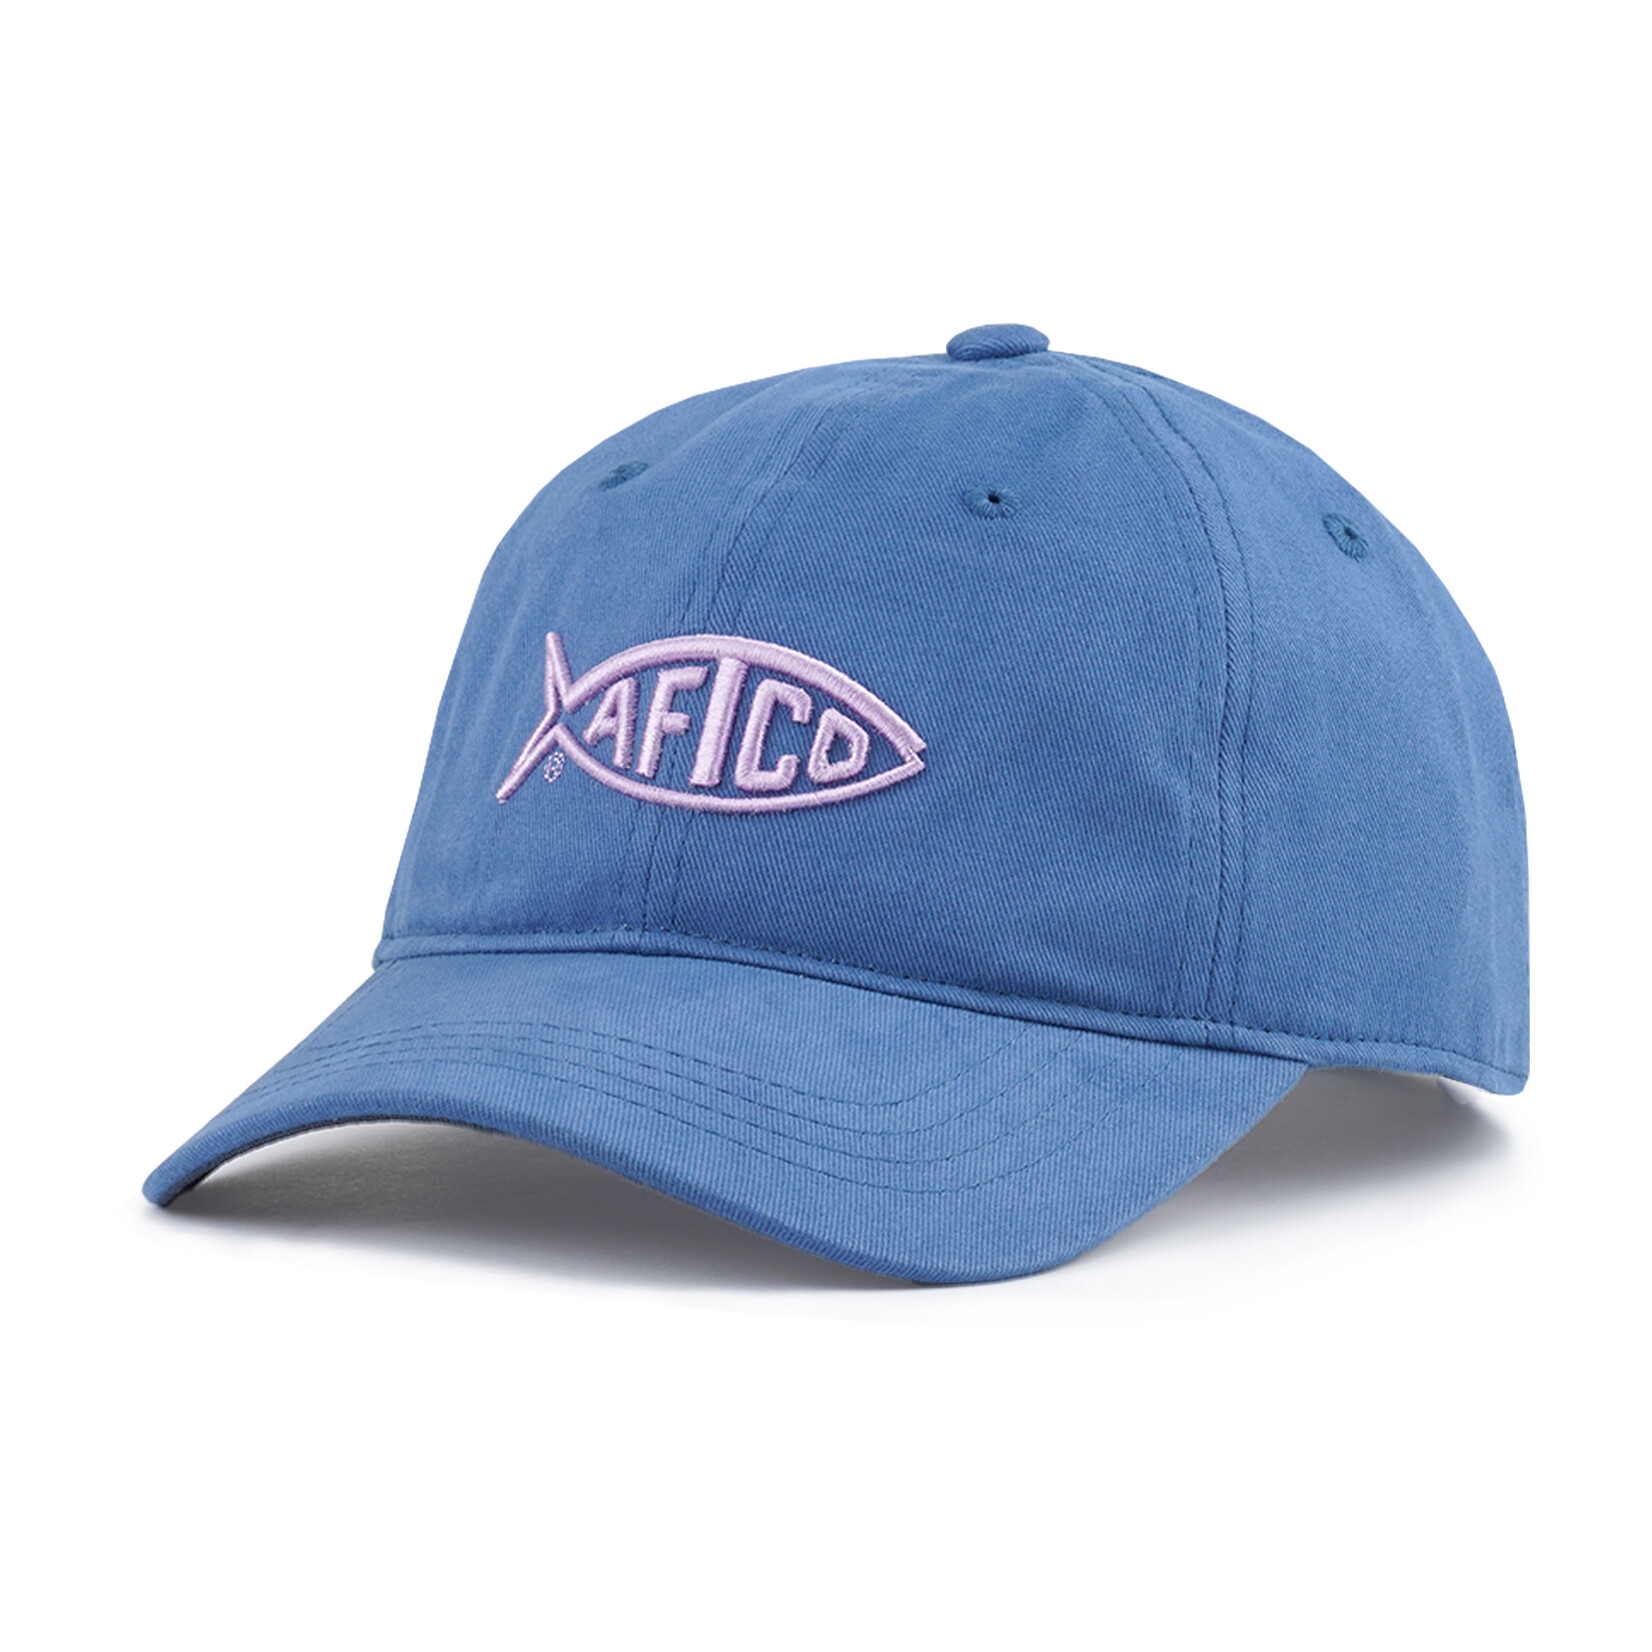 Aftco Aftco Women's Base Camp Snapback Hat